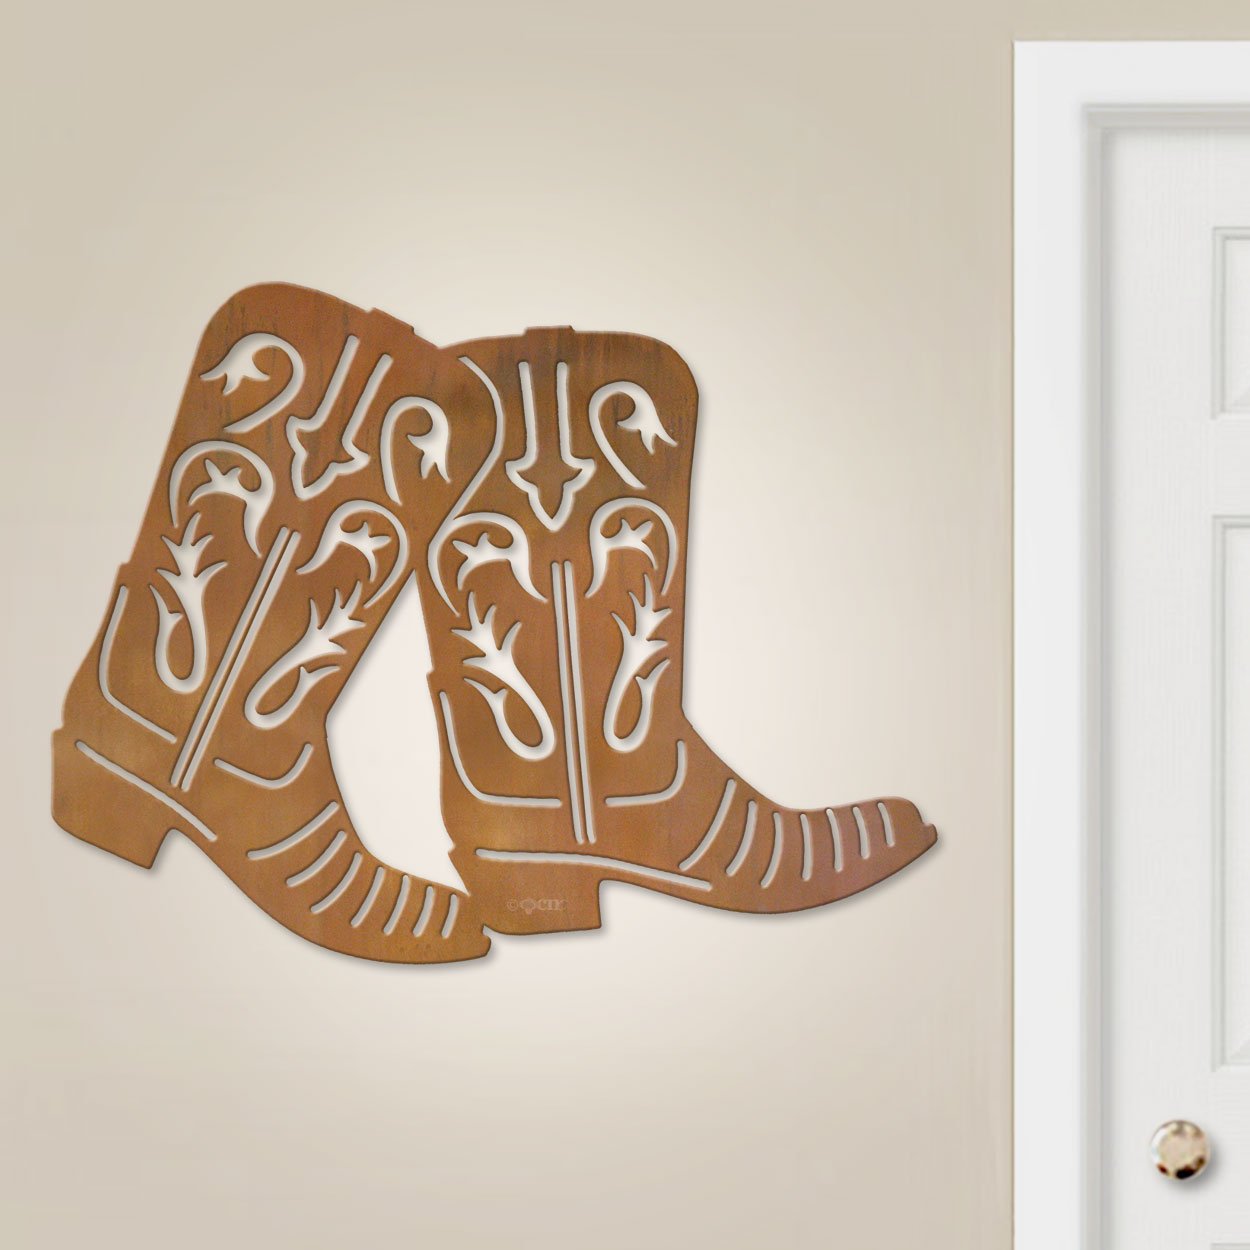 601005 - 36in Cowboy Boots Large Metal Wall Art